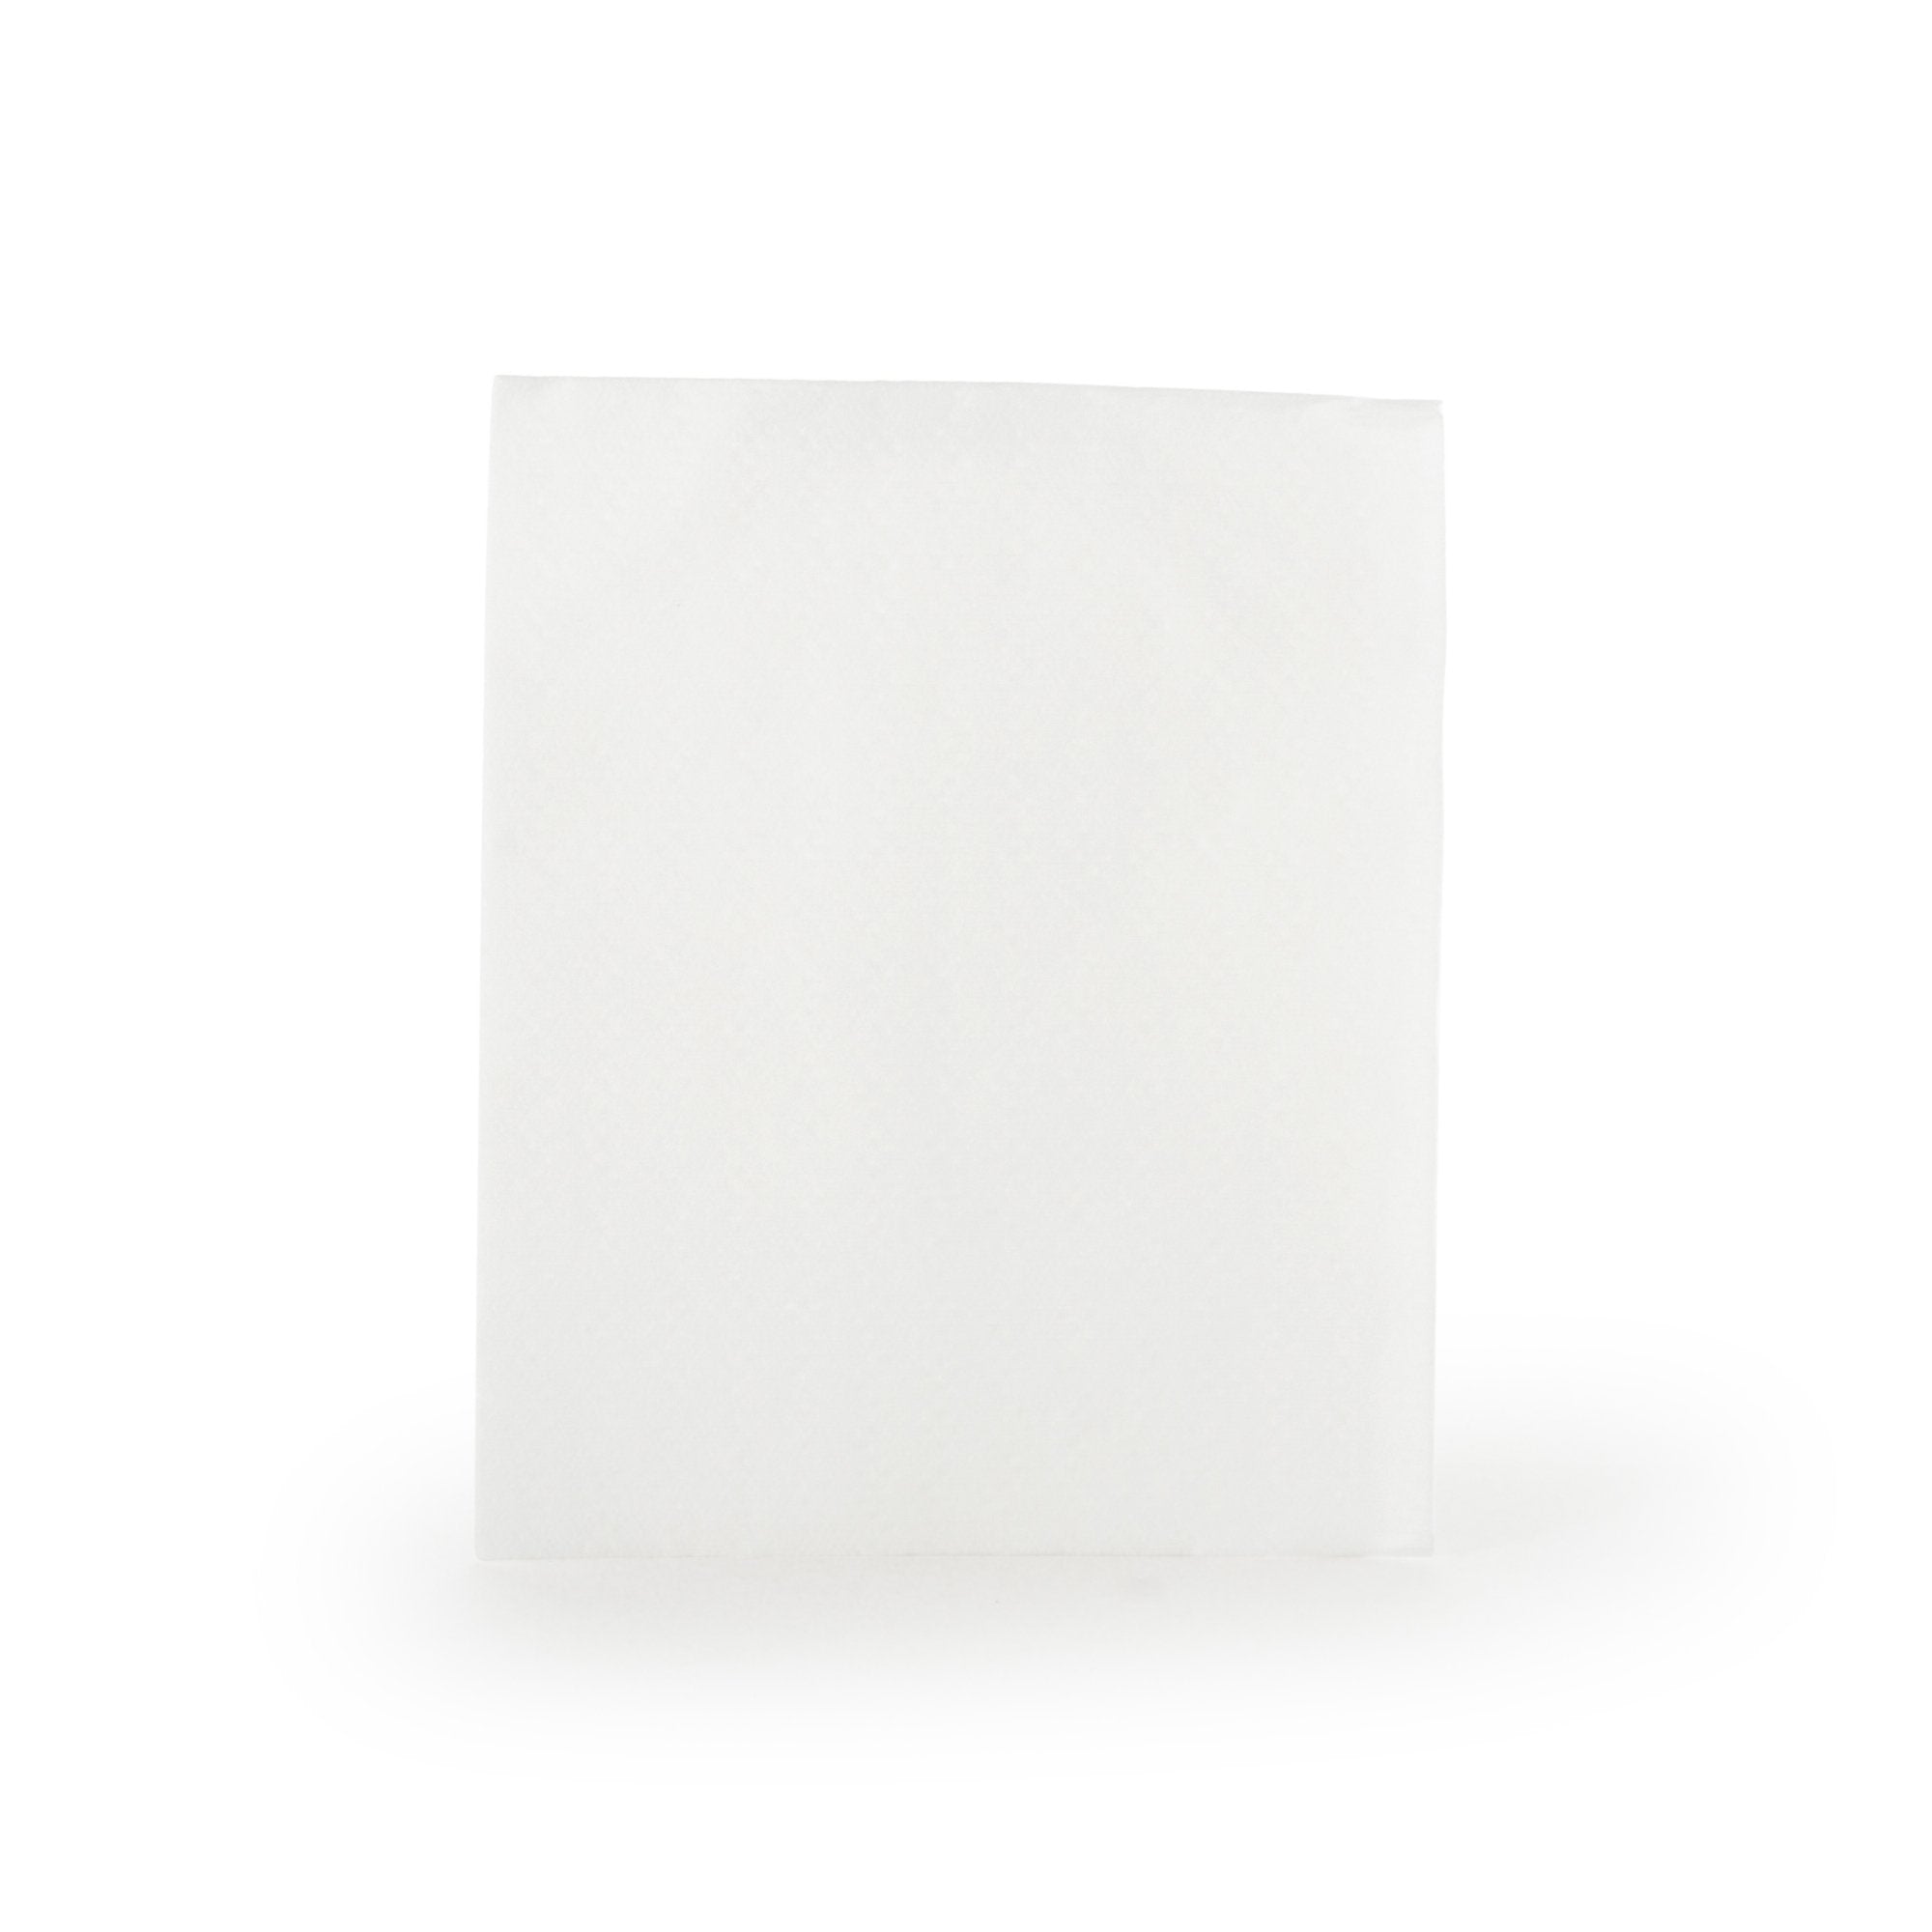 Task Wipe WypAll® X60 Light Duty White NonSterile Hydroknit 10 X 12-1/2 Inch Disposable